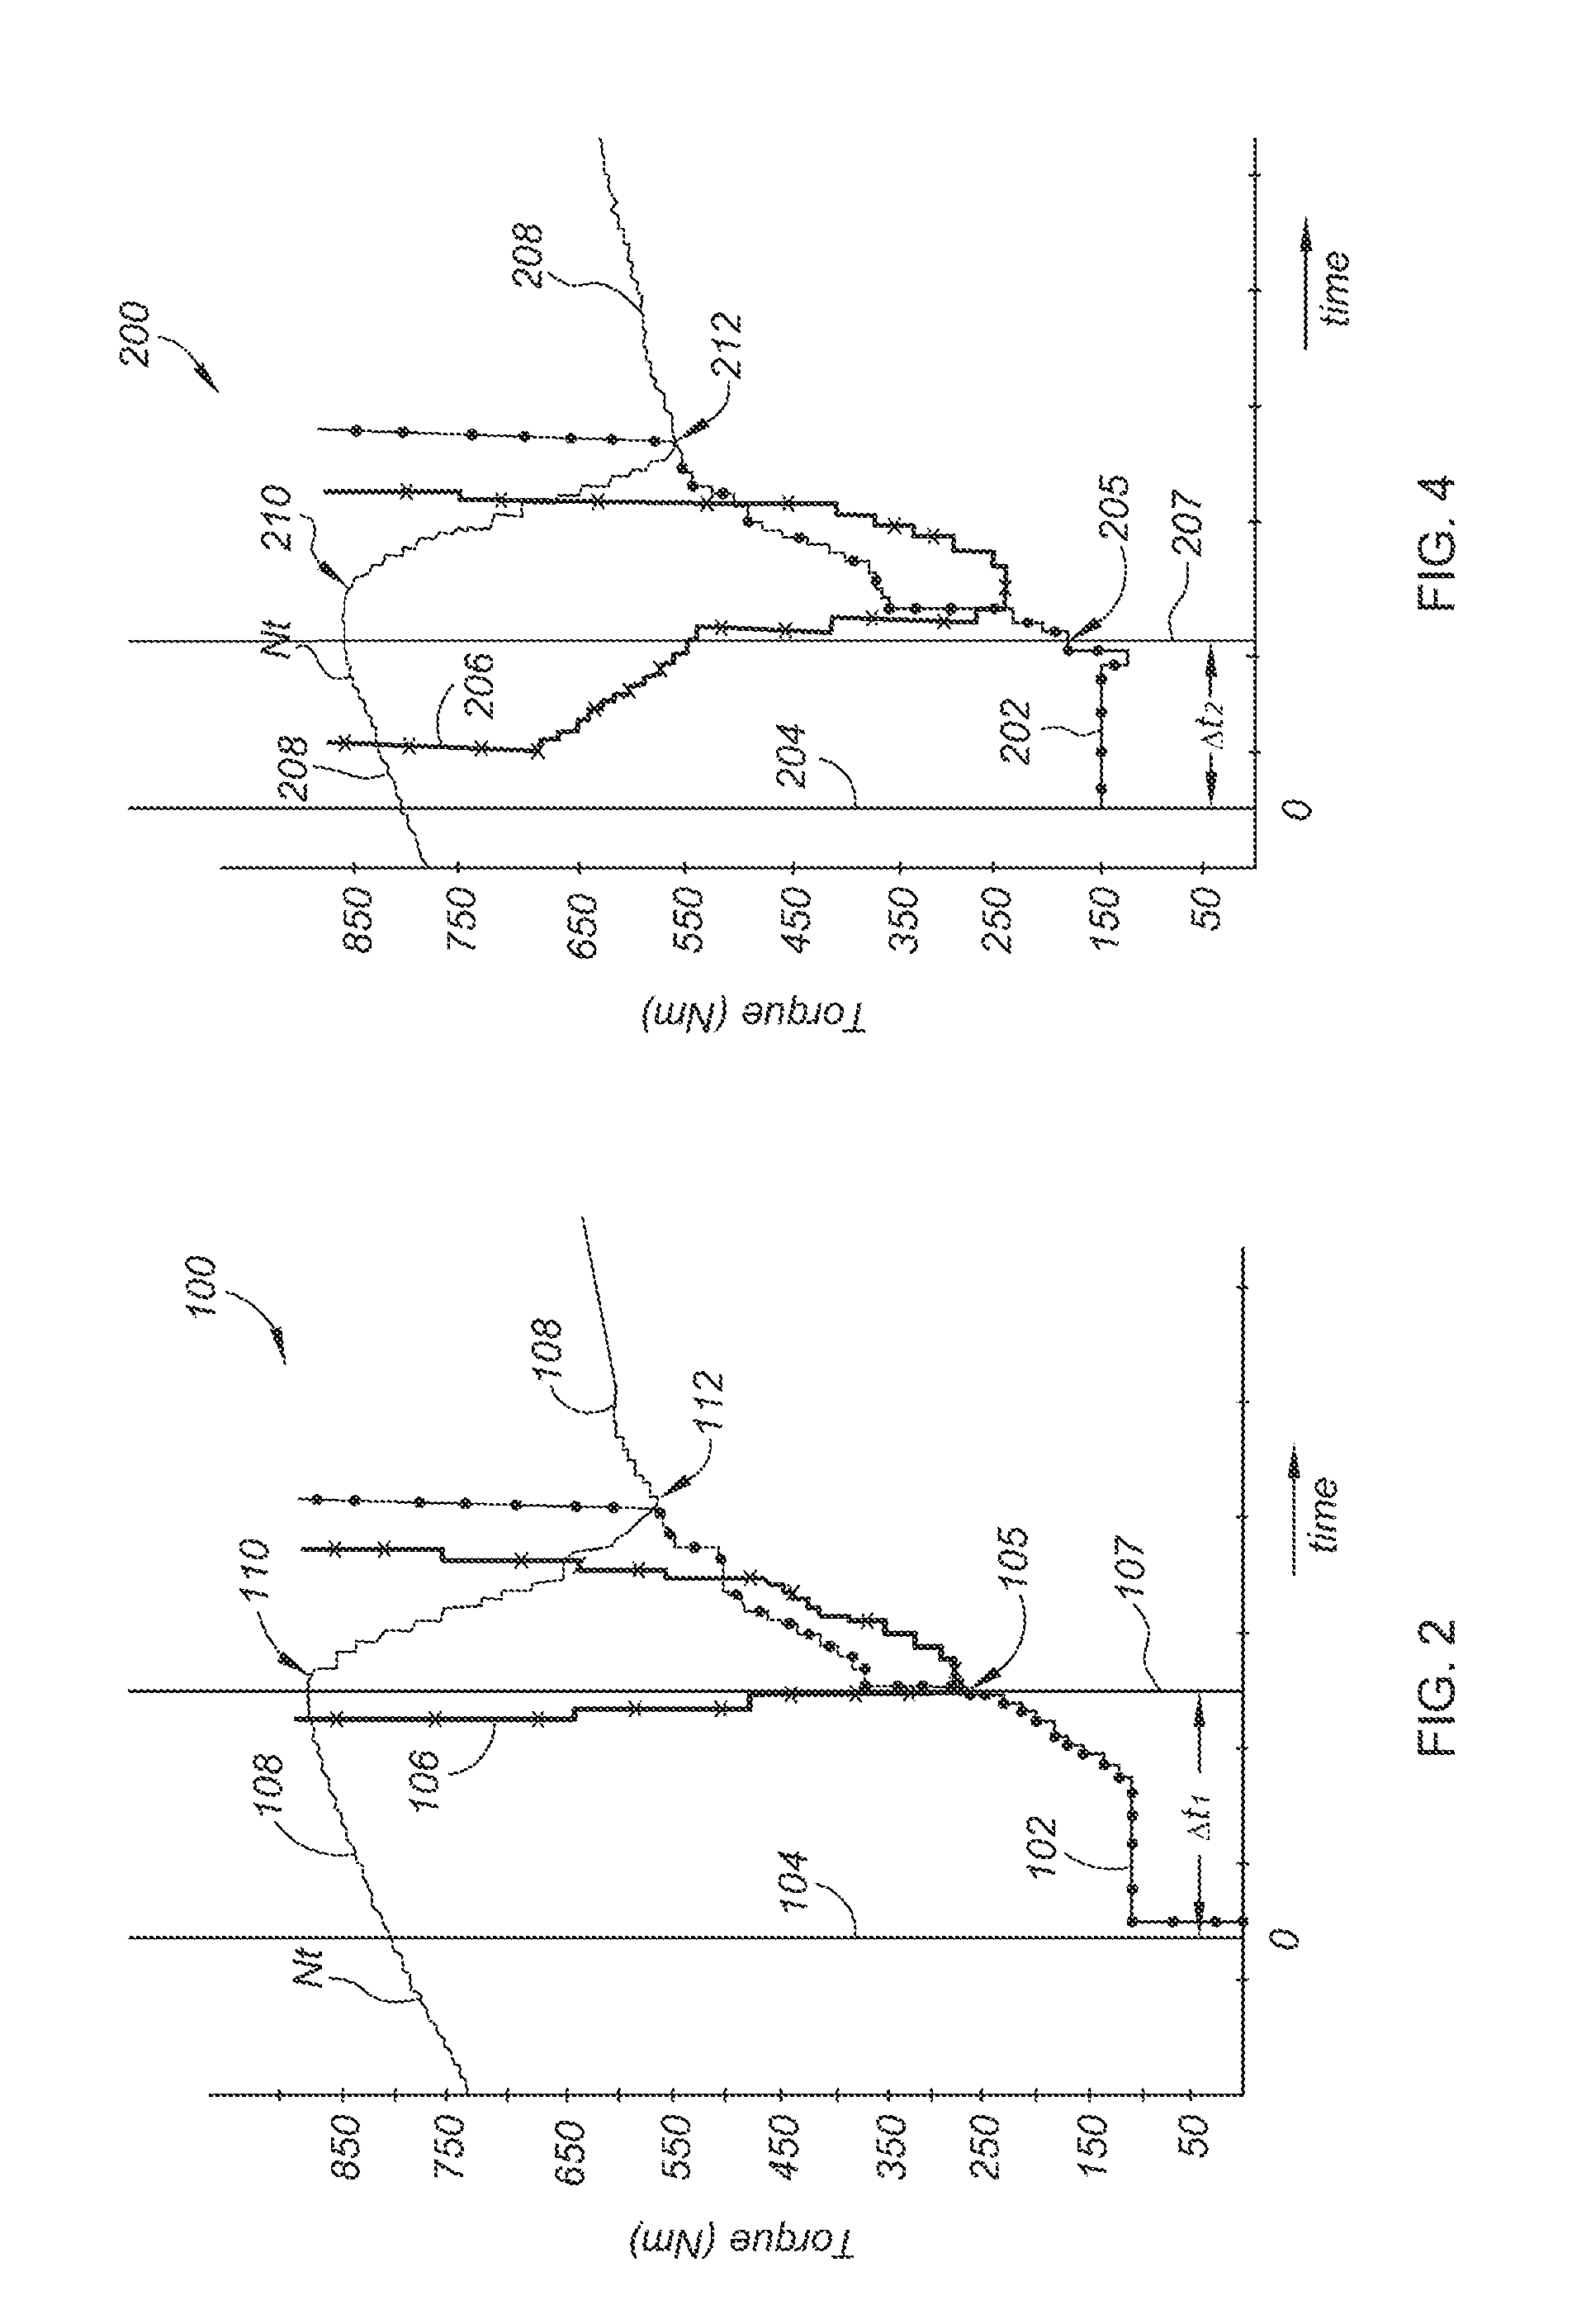 Apparatus and method for decreasing an upshift delay in an automatic transmission